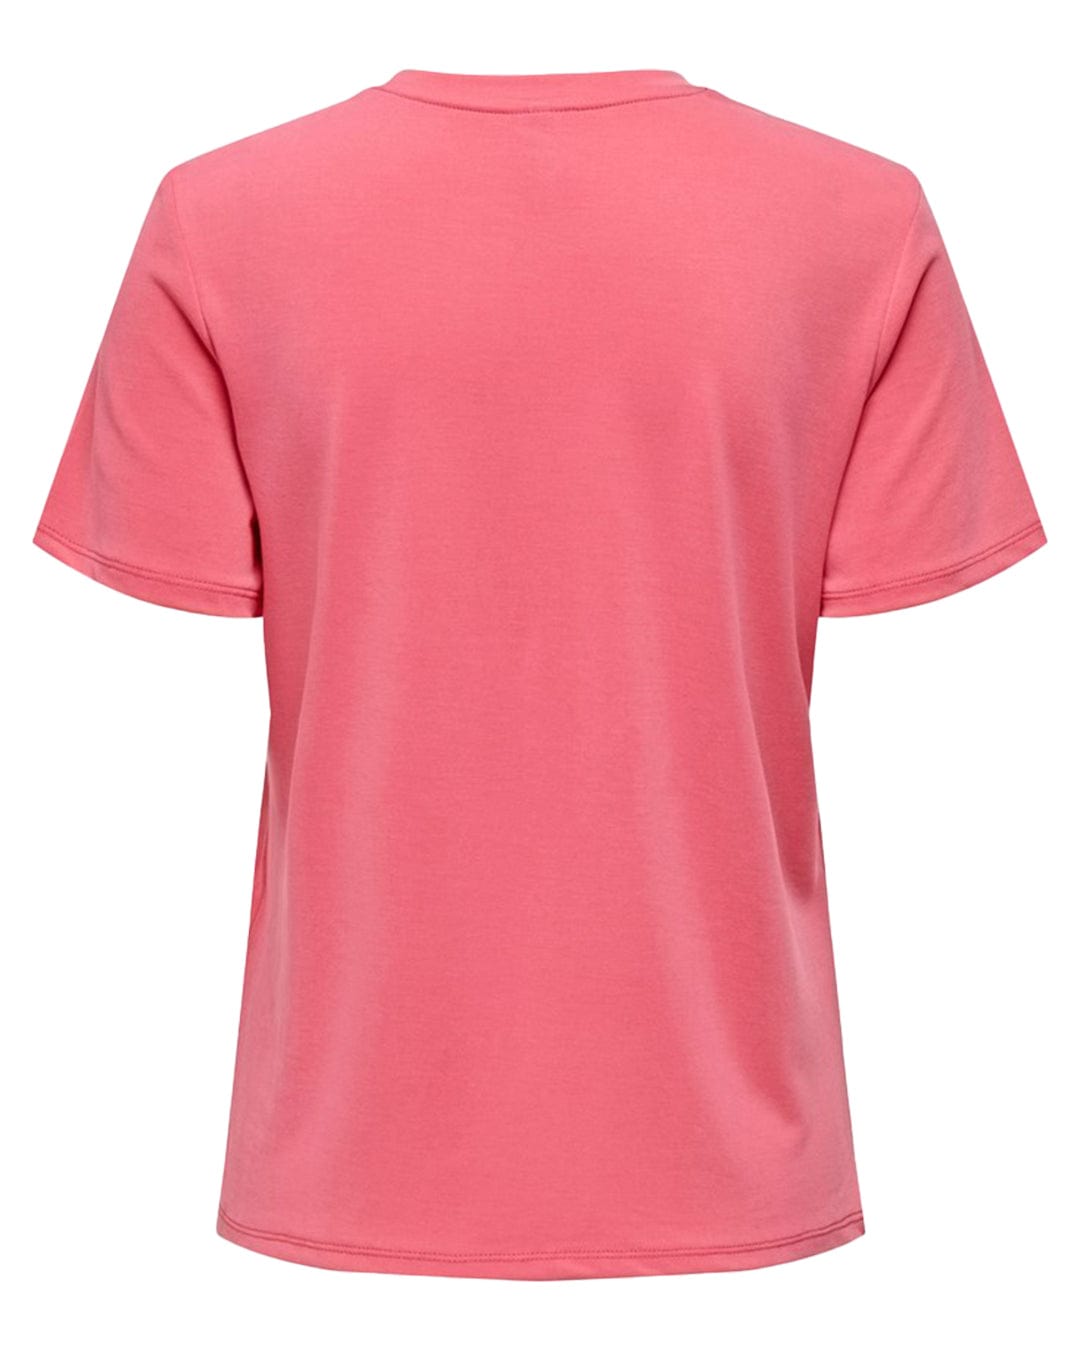 Only T-Shirts Only Free Life Short Sleeved Pink Regular T-Shirt